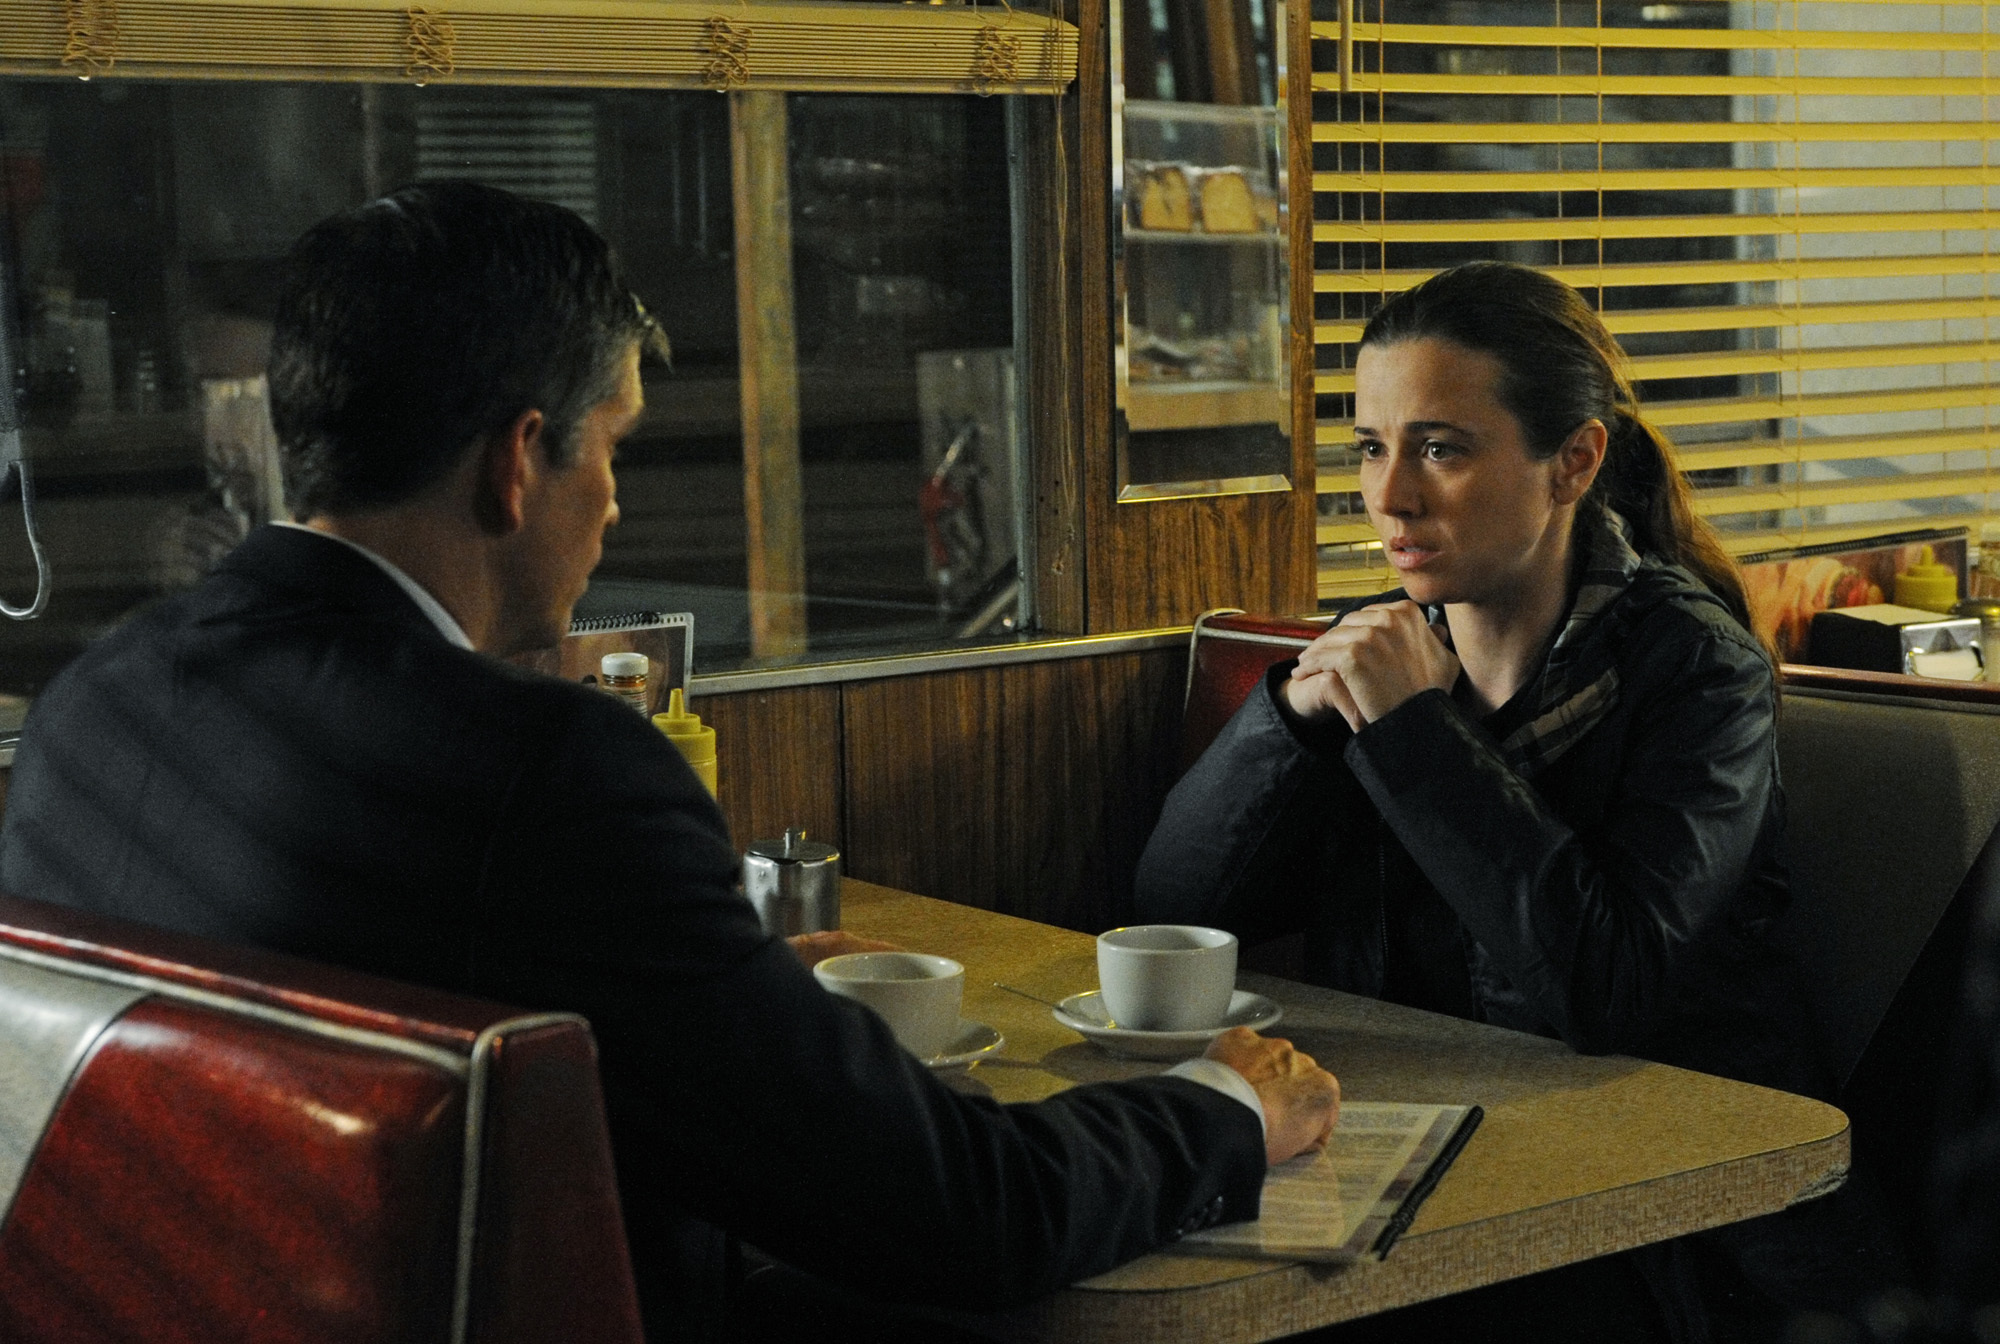 Still of Jim Caviezel and Linda Cardellini in Person of Interest (2011)